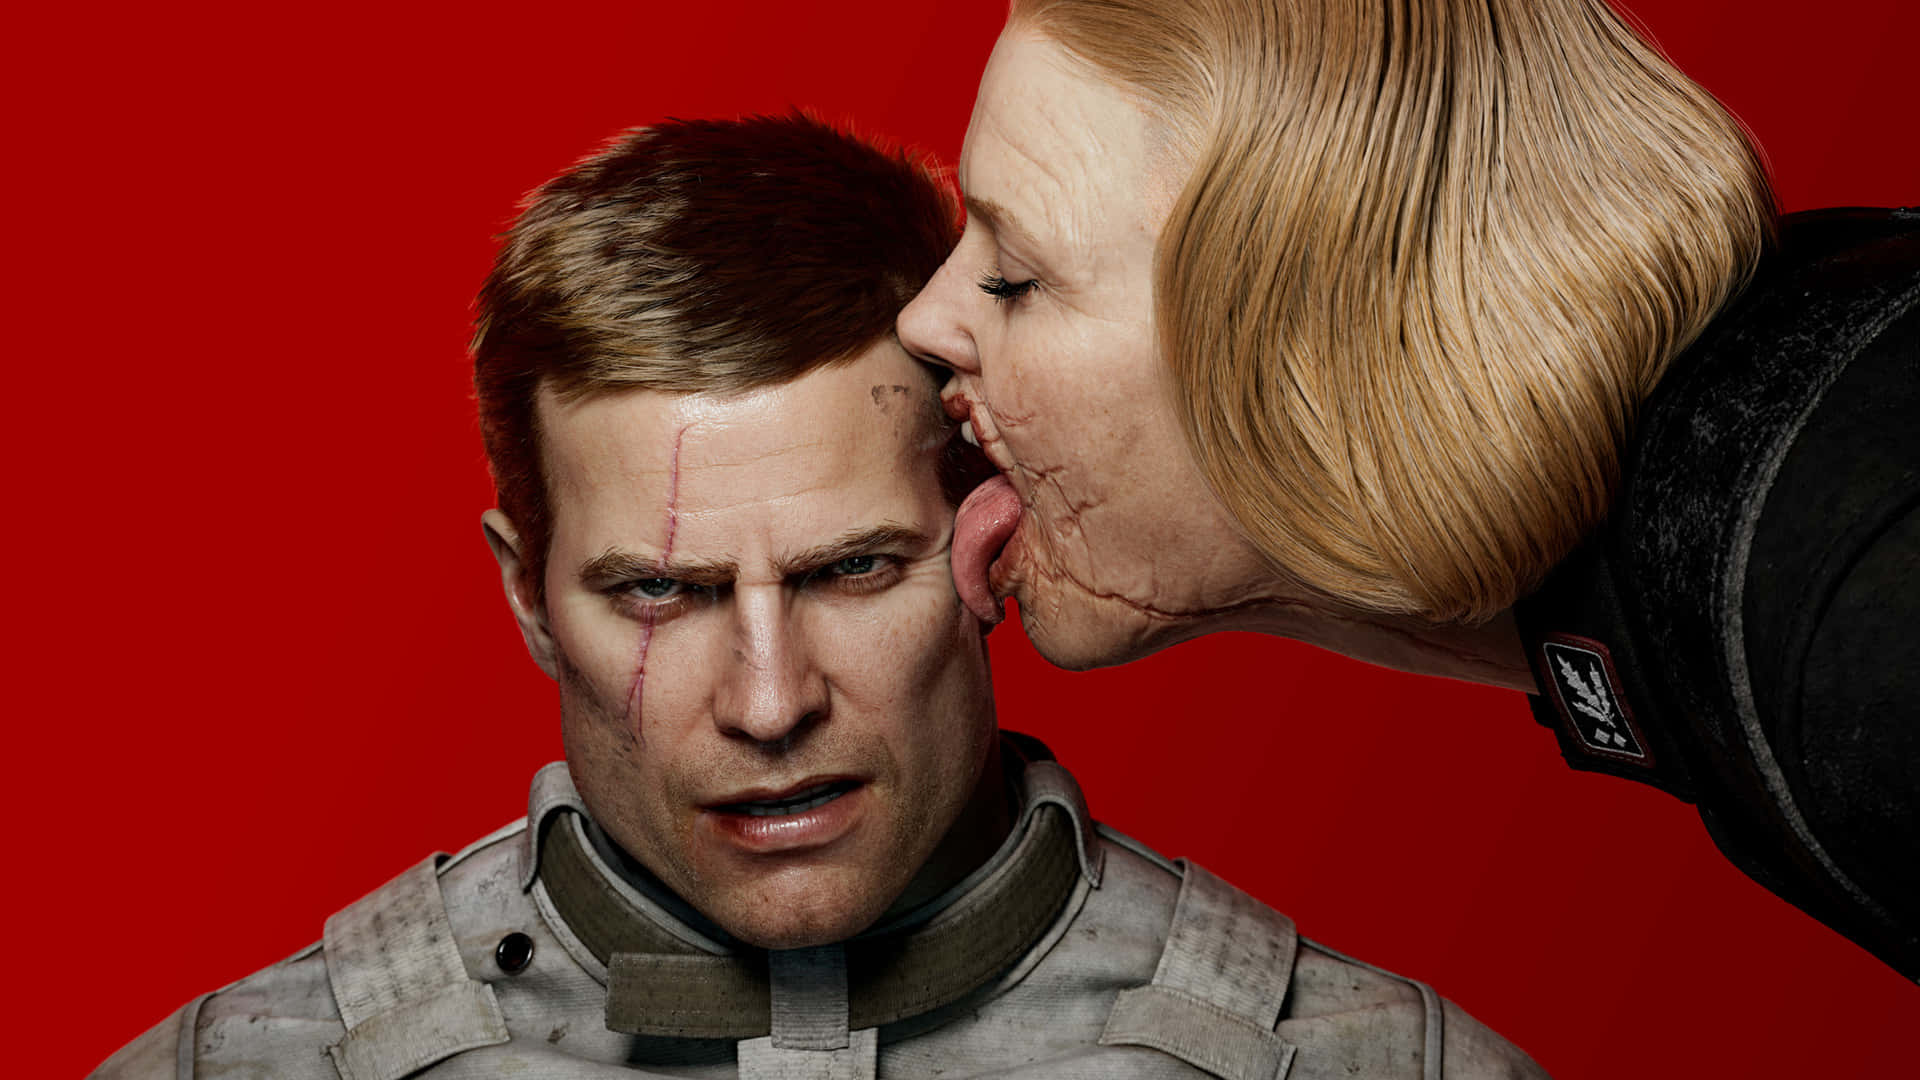 A Man And Woman Kissing Each Other On A Red Background